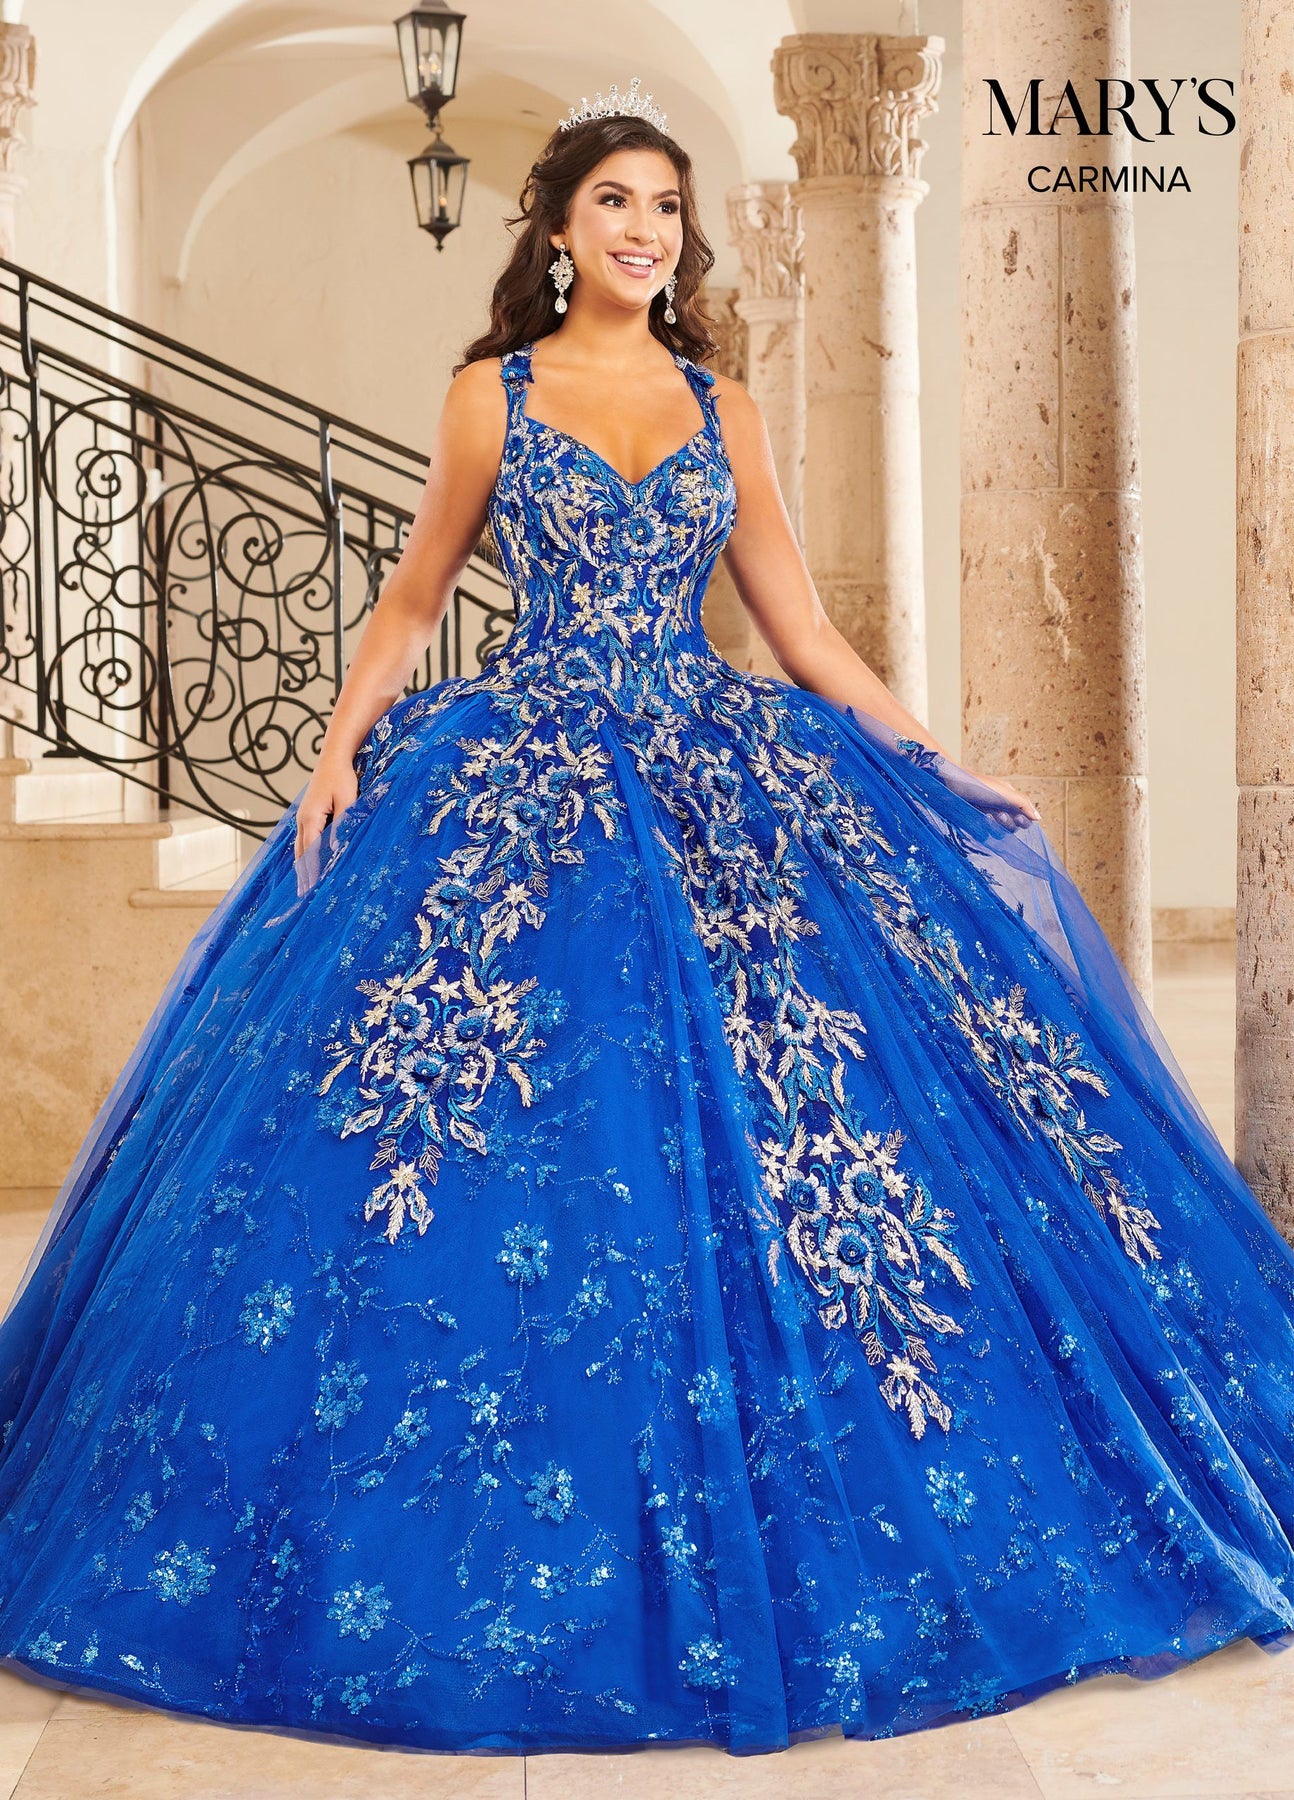 Mary's Bridal Quinceanera Dresses | Mary's Bridal Quinceanera Gowns ...